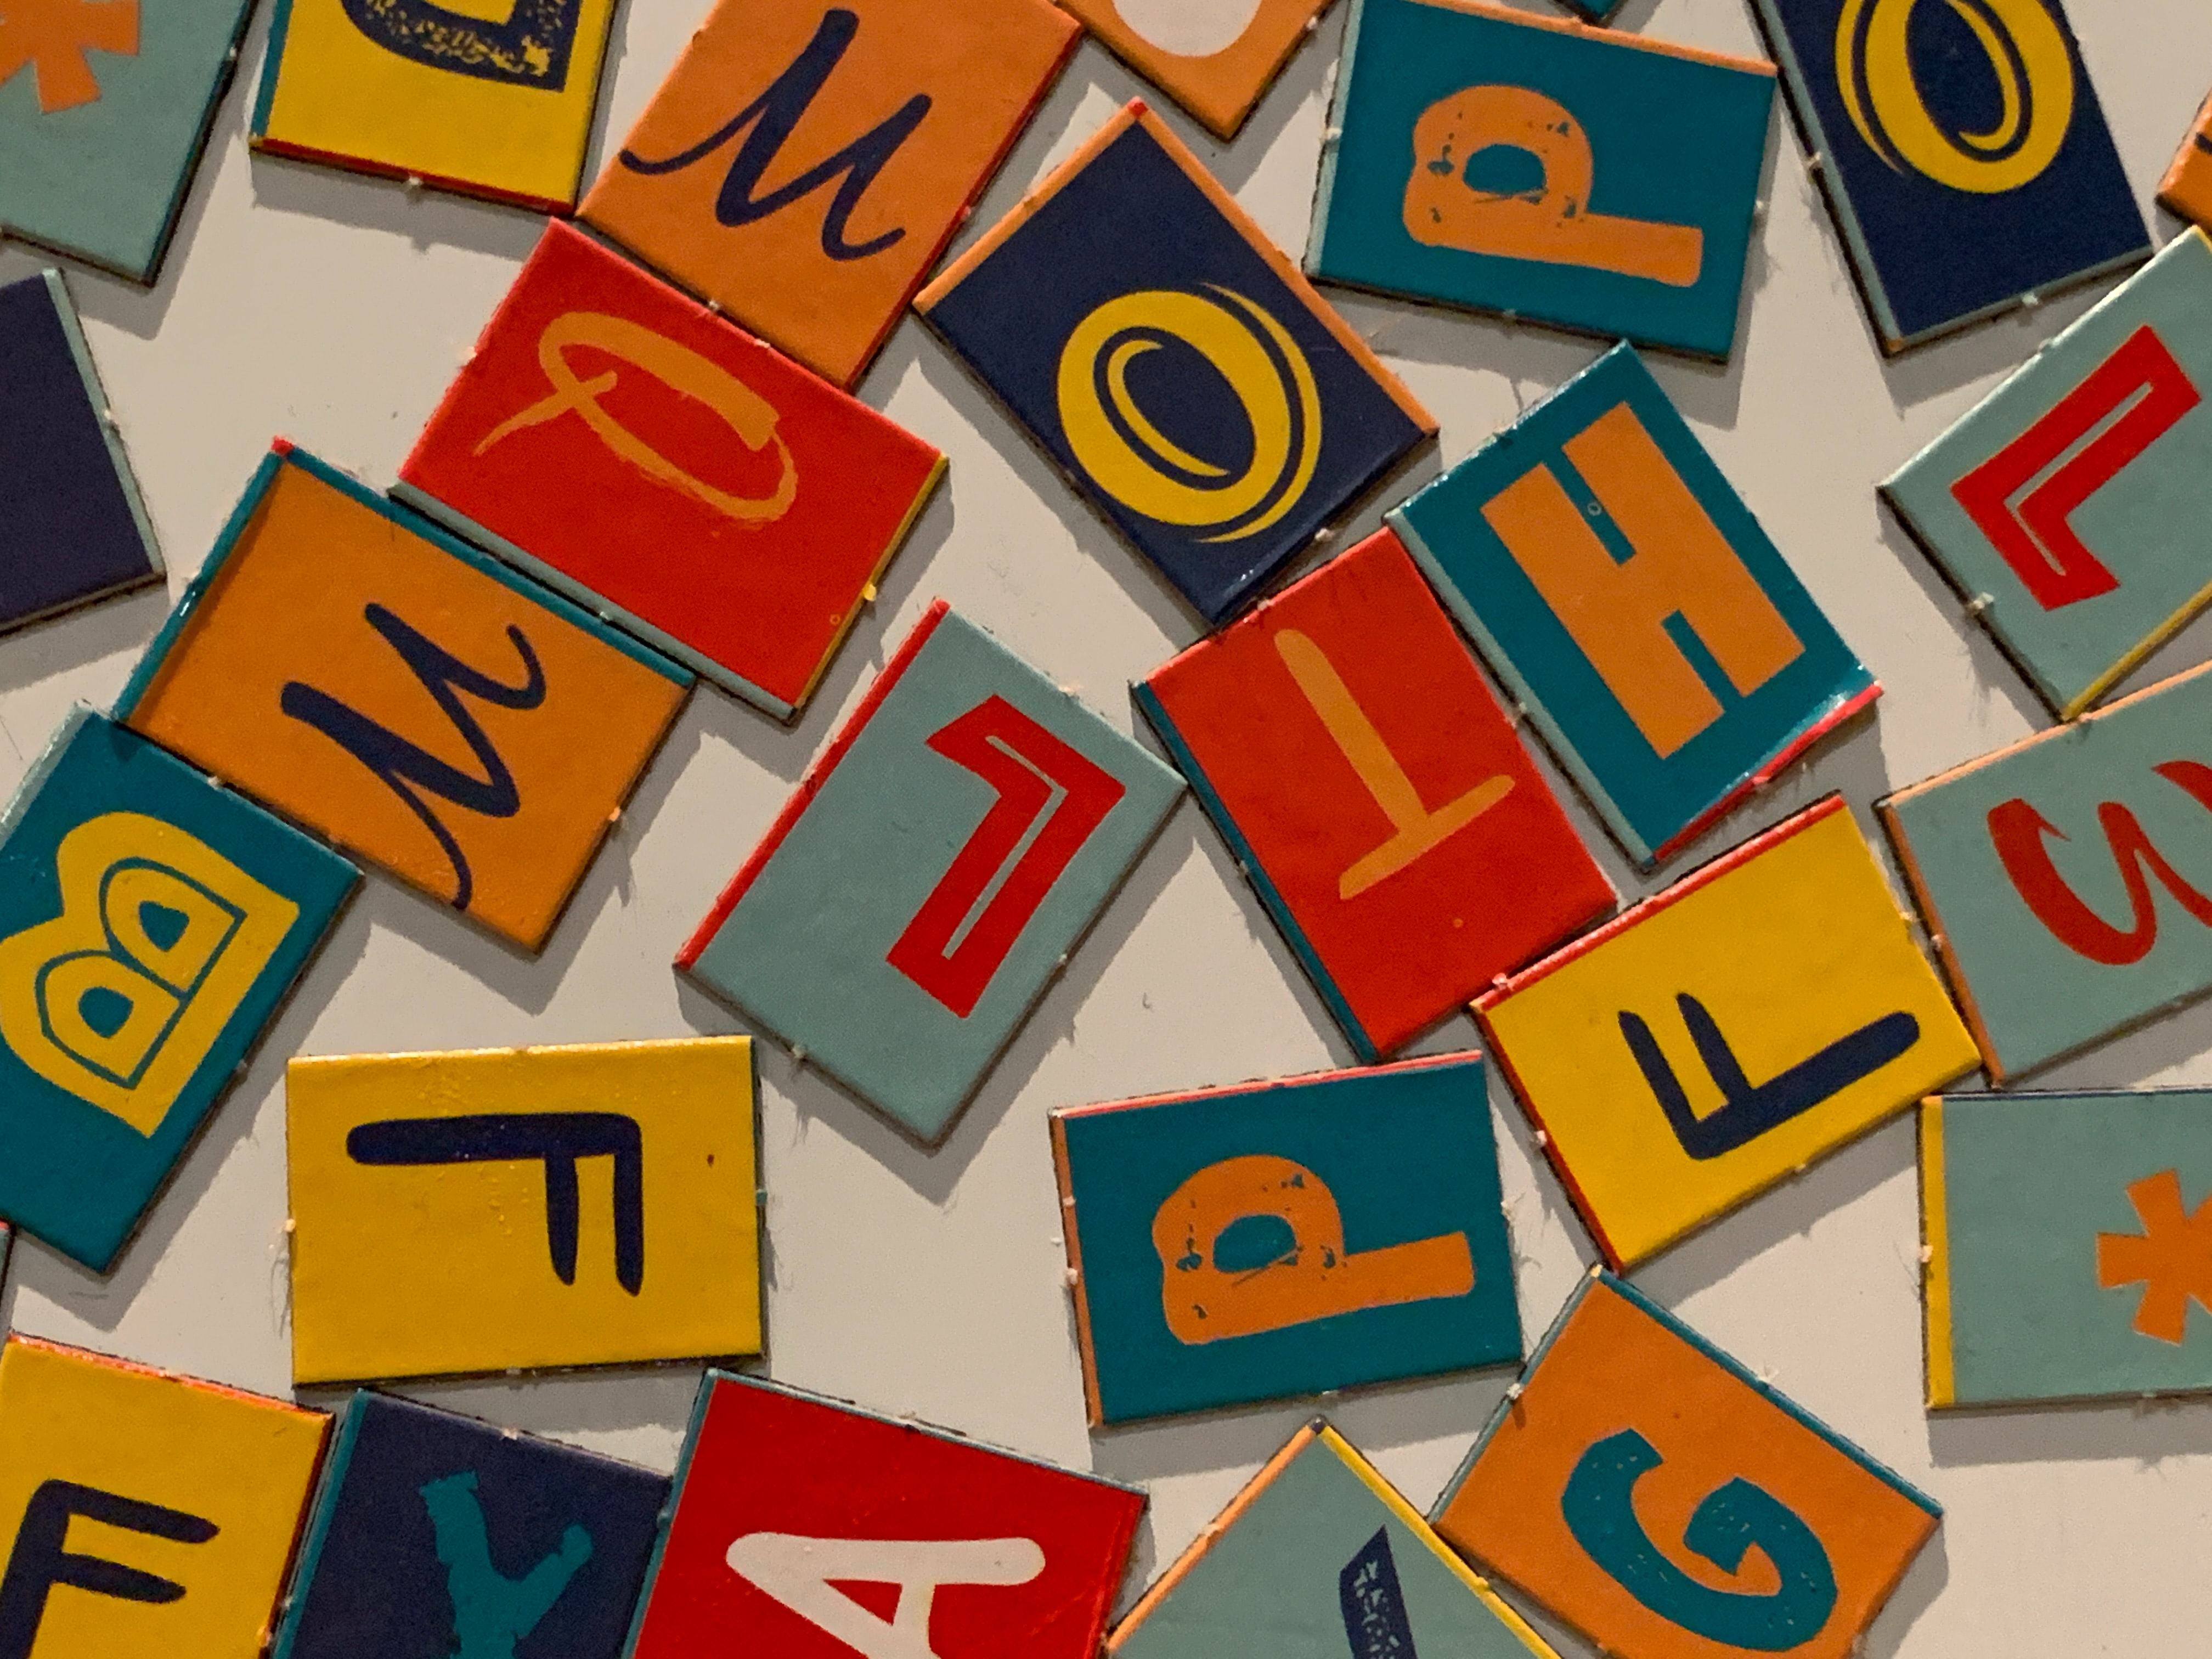 Uppercase letters written on red, orange, blue, and yellow tiles displayed in a disorganized pile